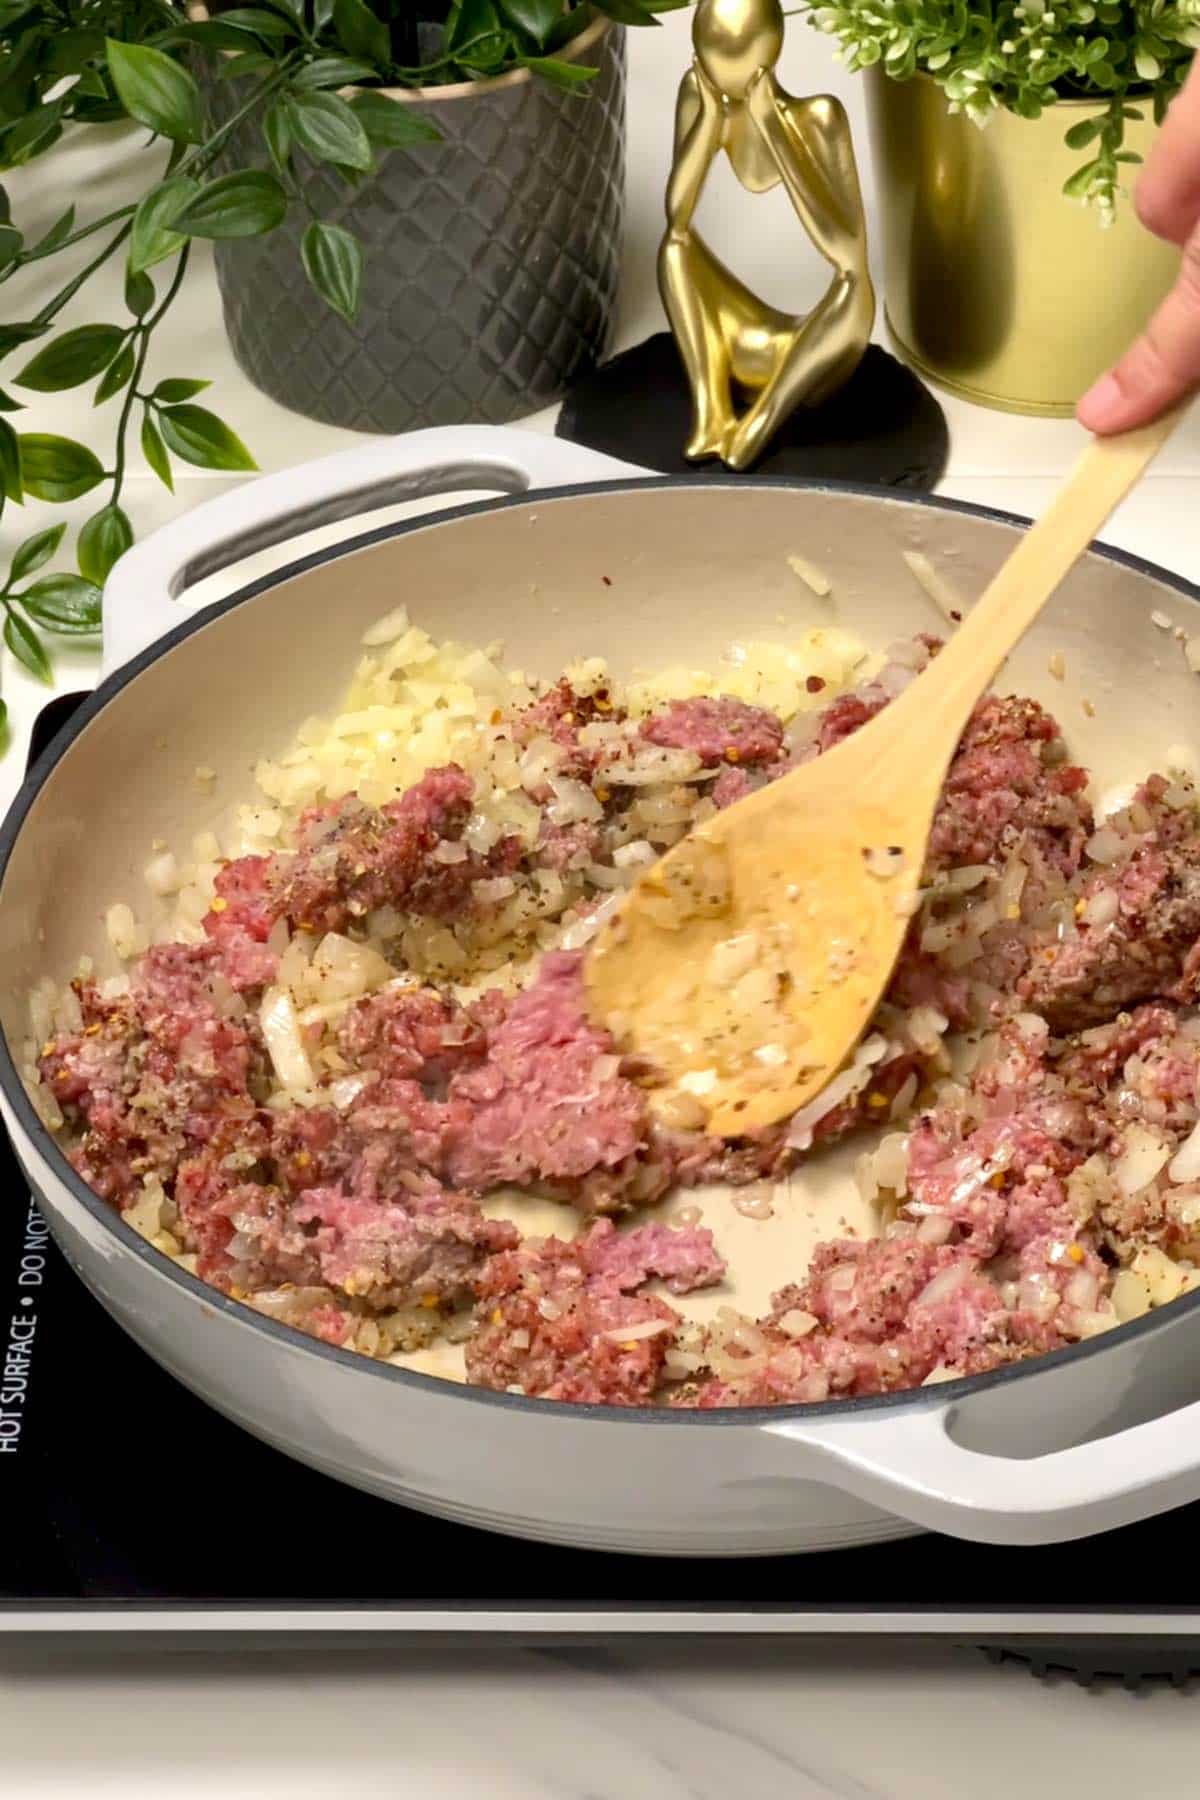 mixing ground beef and seasonings in the skillet